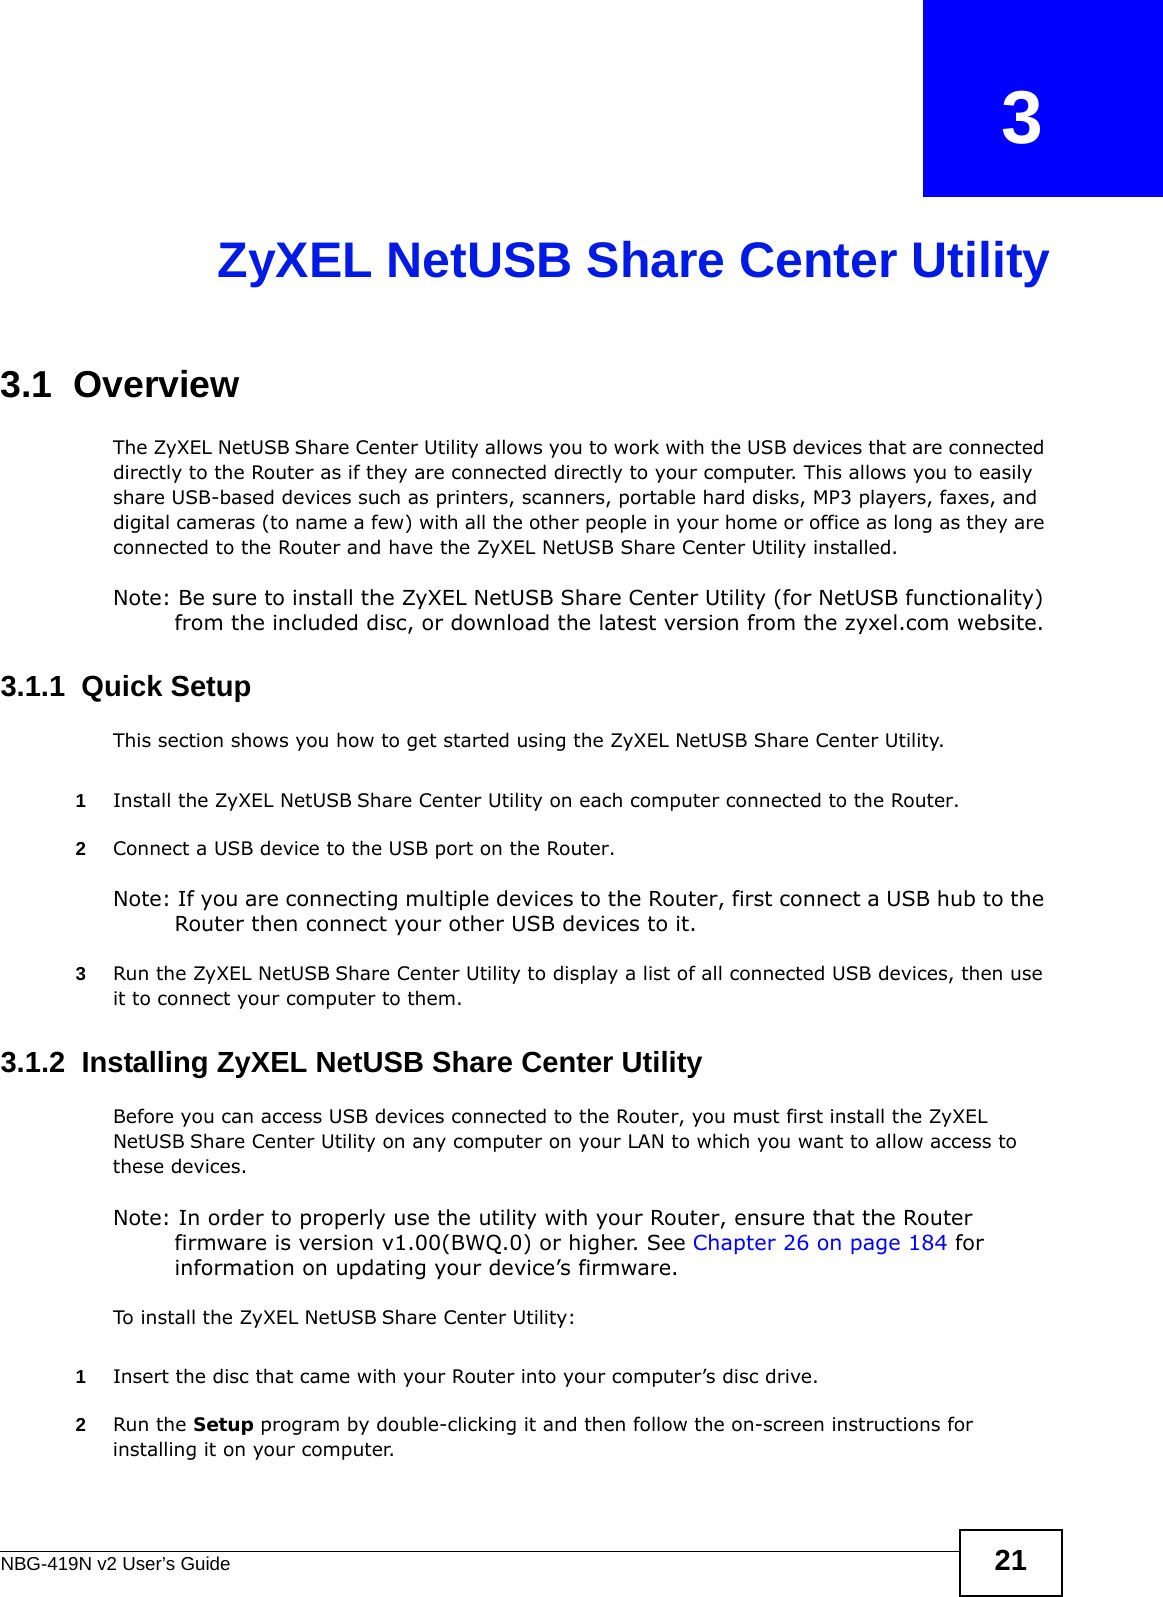 NBG-419N v2 User’s Guide 21CHAPTER   3ZyXEL NetUSB Share Center Utility3.1  OverviewThe ZyXEL NetUSB Share Center Utility allows you to work with the USB devices that are connected directly to the Router as if they are connected directly to your computer. This allows you to easily share USB-based devices such as printers, scanners, portable hard disks, MP3 players, faxes, and digital cameras (to name a few) with all the other people in your home or office as long as they are connected to the Router and have the ZyXEL NetUSB Share Center Utility installed.Note: Be sure to install the ZyXEL NetUSB Share Center Utility (for NetUSB functionality) from the included disc, or download the latest version from the zyxel.com website.3.1.1  Quick SetupThis section shows you how to get started using the ZyXEL NetUSB Share Center Utility.1Install the ZyXEL NetUSB Share Center Utility on each computer connected to the Router.2Connect a USB device to the USB port on the Router. Note: If you are connecting multiple devices to the Router, first connect a USB hub to the Router then connect your other USB devices to it.3Run the ZyXEL NetUSB Share Center Utility to display a list of all connected USB devices, then use it to connect your computer to them.3.1.2  Installing ZyXEL NetUSB Share Center UtilityBefore you can access USB devices connected to the Router, you must first install the ZyXEL NetUSB Share Center Utility on any computer on your LAN to which you want to allow access to these devices.Note: In order to properly use the utility with your Router, ensure that the Router firmware is version v1.00(BWQ.0) or higher. See Chapter 26 on page 184 for information on updating your device’s firmware.To install the ZyXEL NetUSB Share Center Utility:1Insert the disc that came with your Router into your computer’s disc drive.2Run the Setup program by double-clicking it and then follow the on-screen instructions for installing it on your computer.